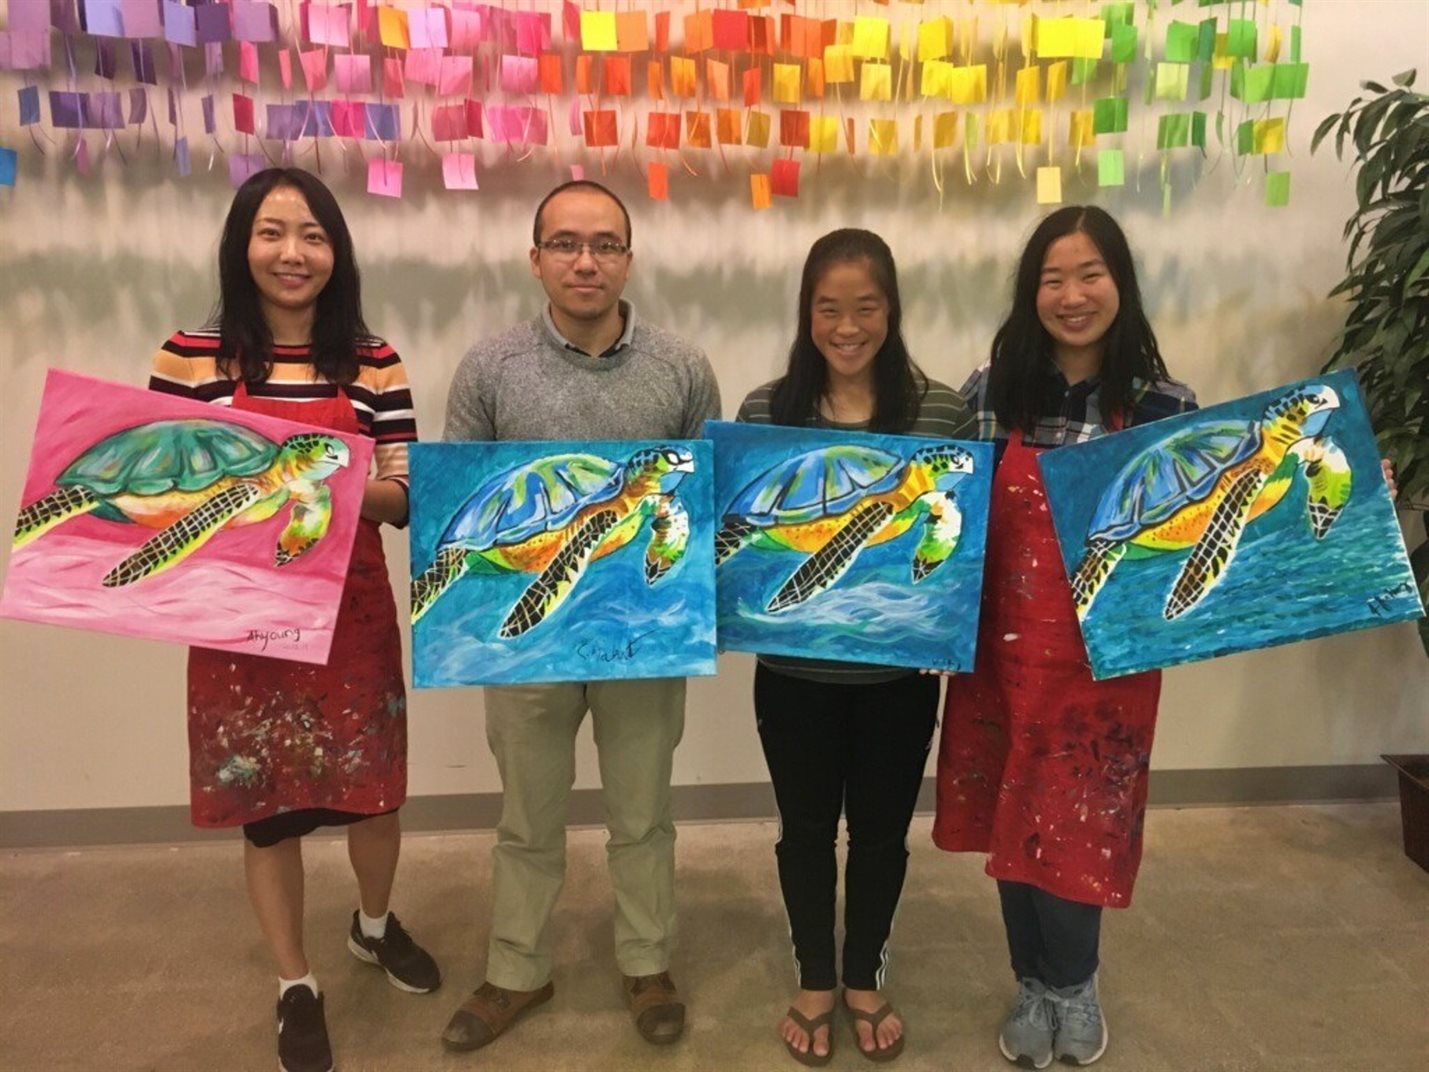 Ahyoung Kim (left) is all smiles while showing off her artwork alongside her friends she met during her time in MatSE's&nbsp; Graduate Program during a paint night. Pictured, from left, are: Ahyoung Kim, Sushant Mahat, Sherly Huang and Jennifer Huang.